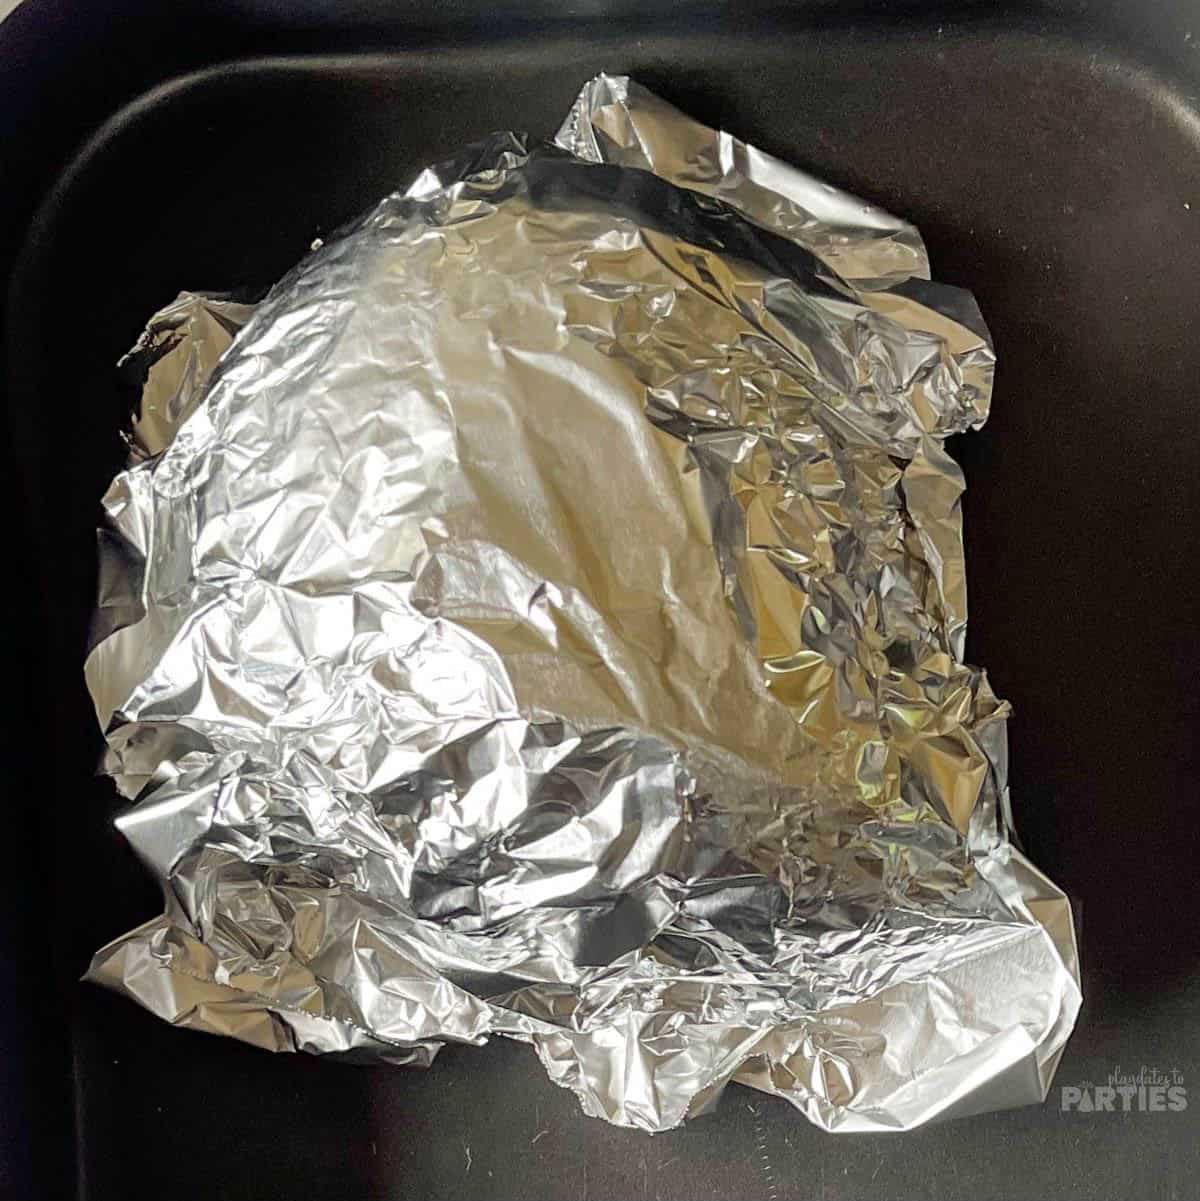 Ham wrapped in foil in a roasting pan.